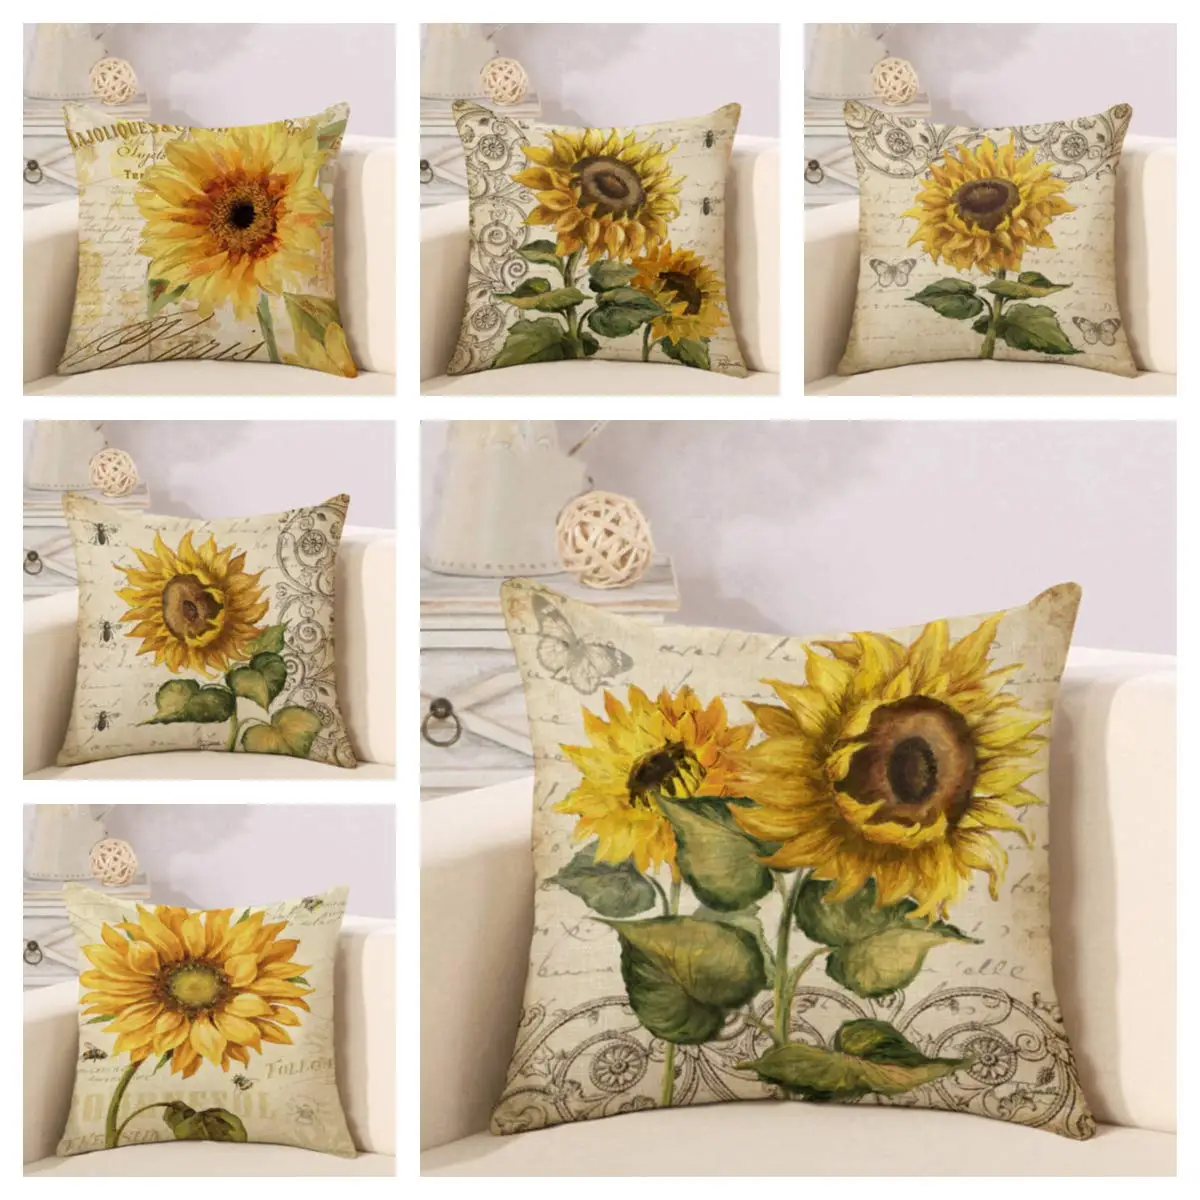 

Retro sunflower print linen pillowcase sofa cushion cover home decoration can be customized for you 40x40 50x50 60x60 45x45